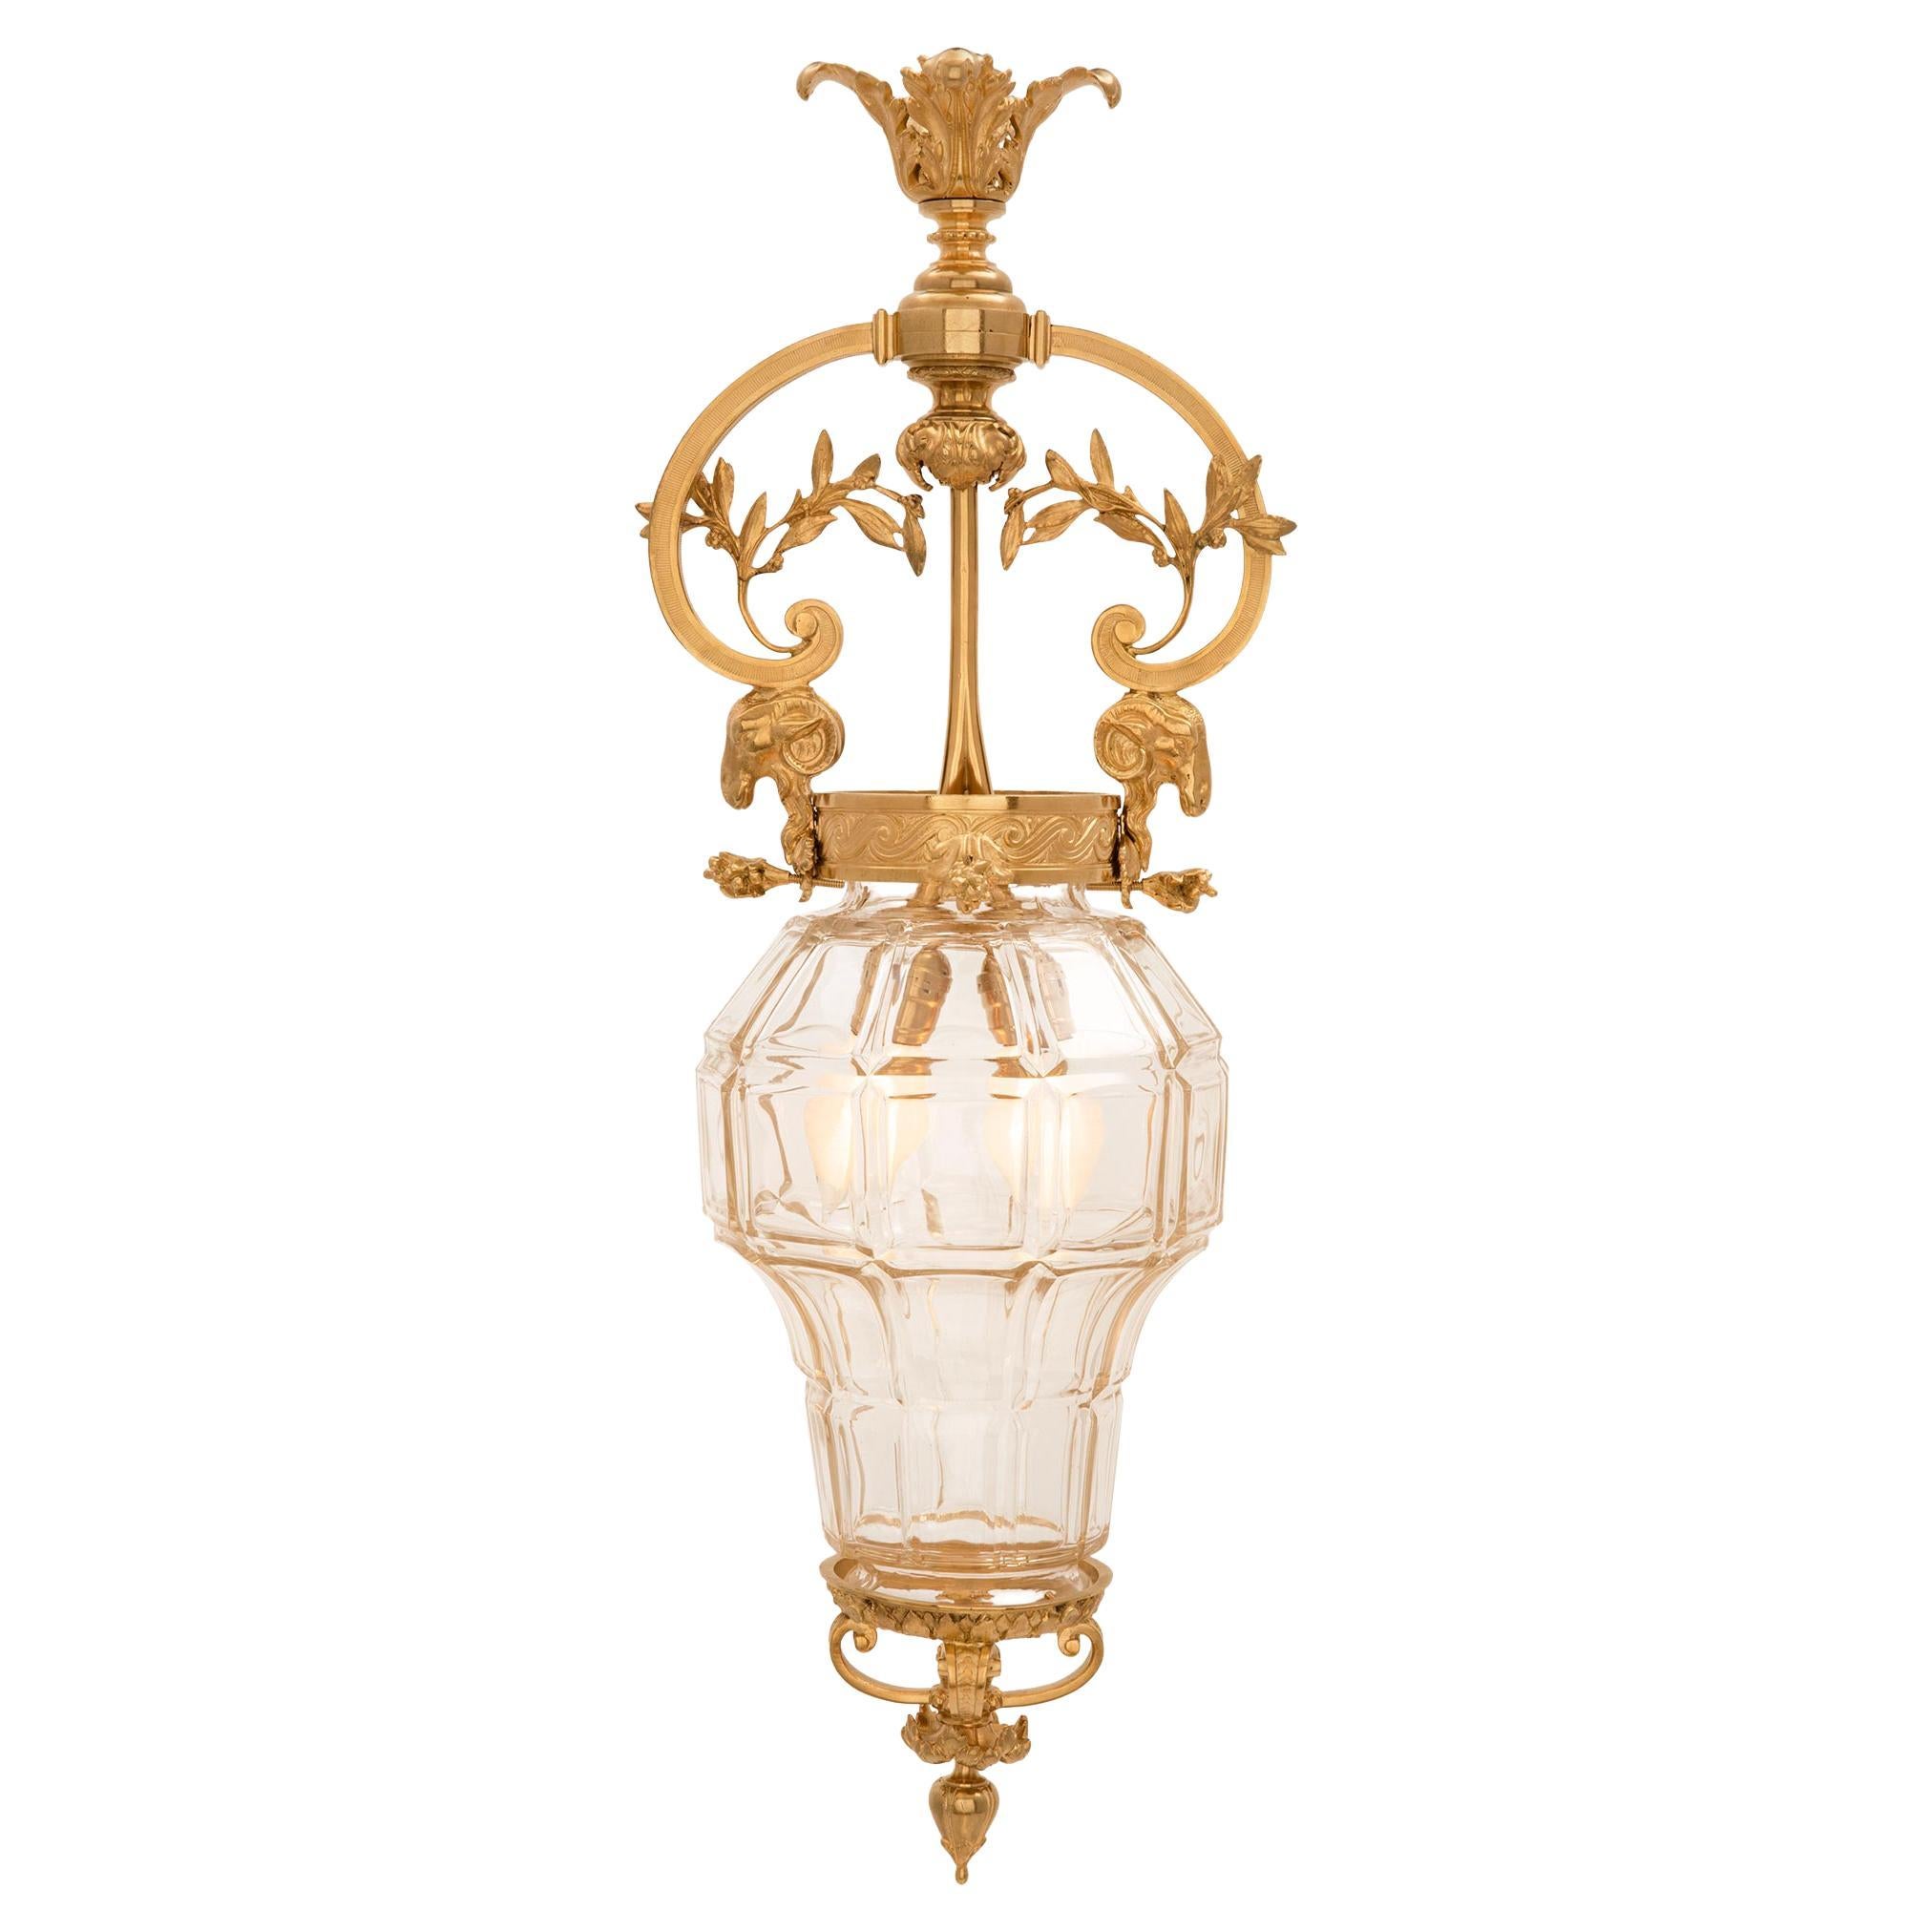 French 19th Century Louis XVI Style Ormolu and Glass Lantern For Sale